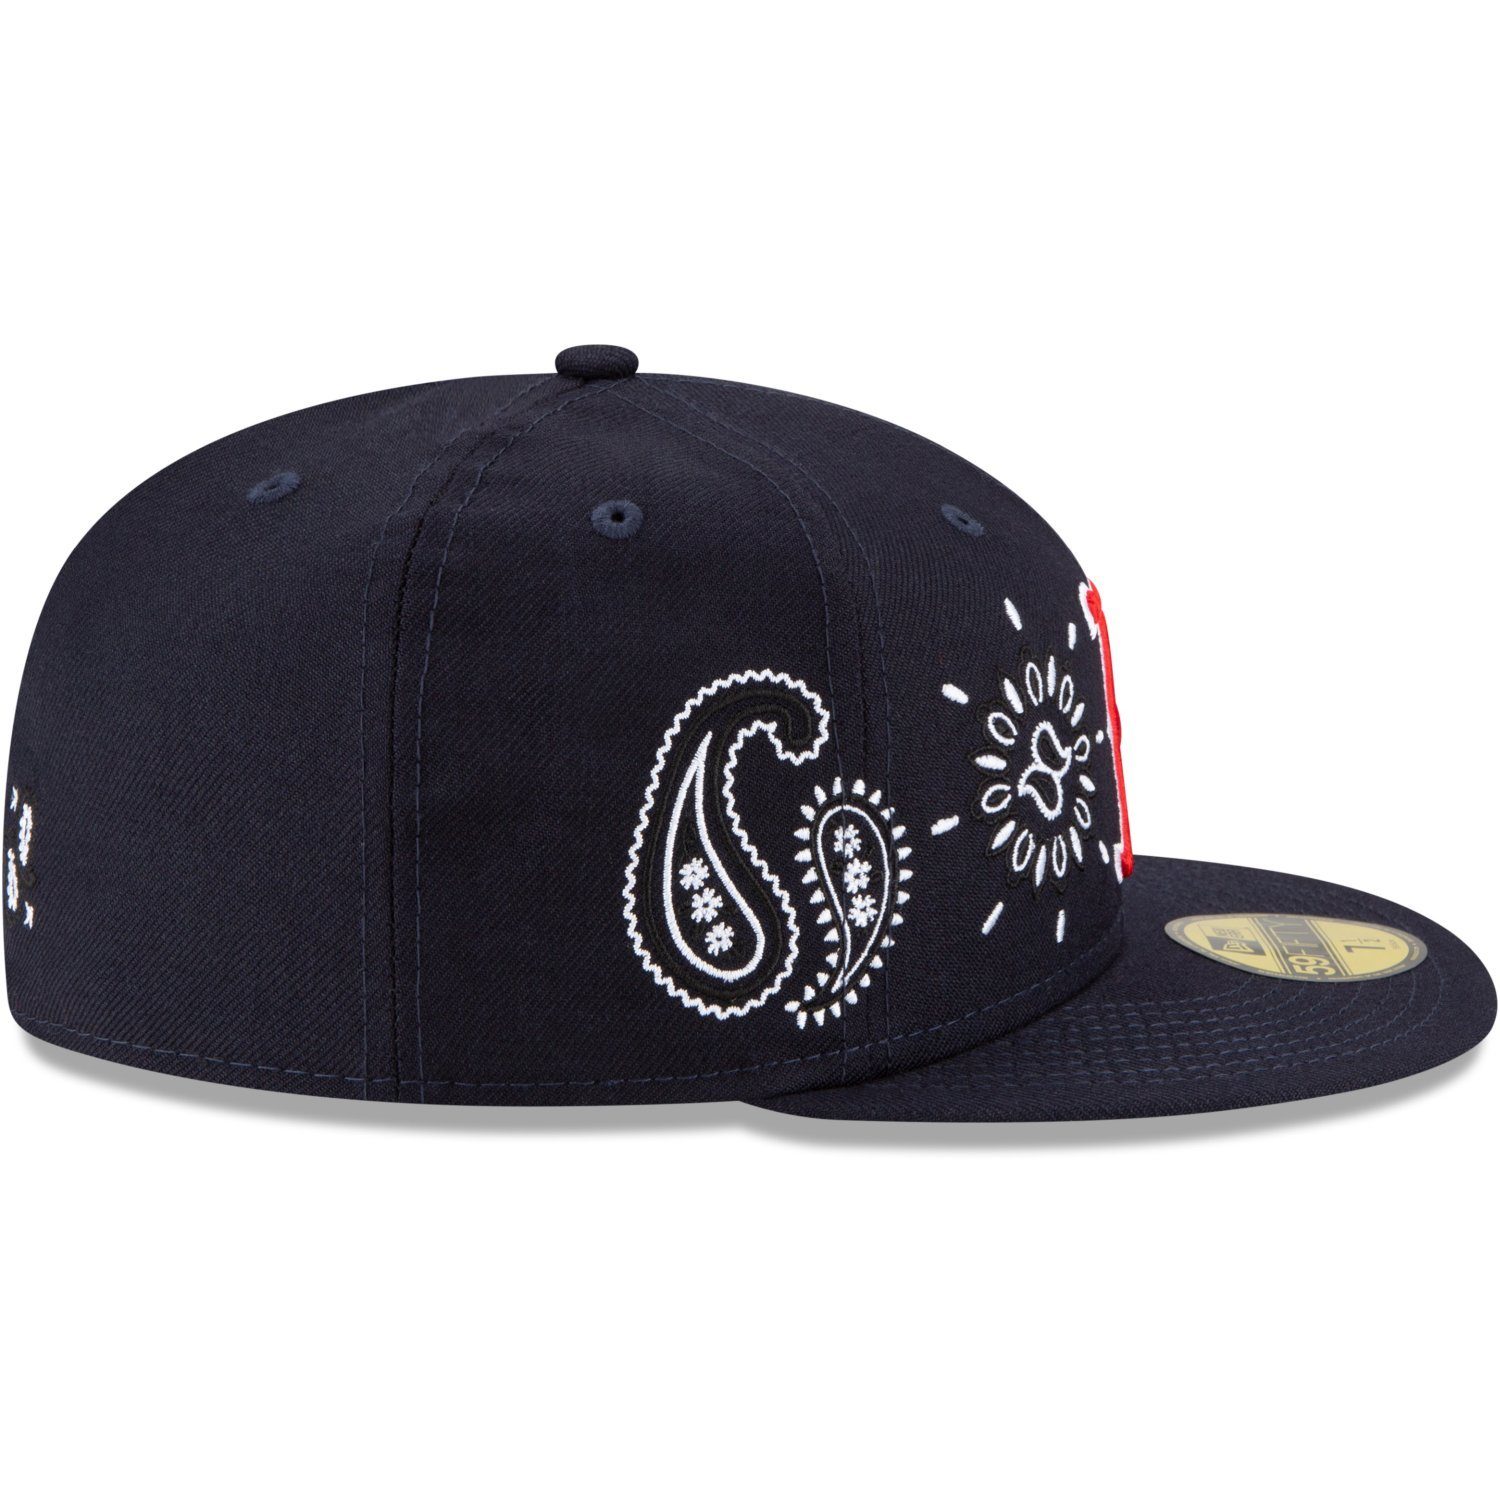 New Era 59Fifty PAISLEY Red Fitted Boston Cap Sox